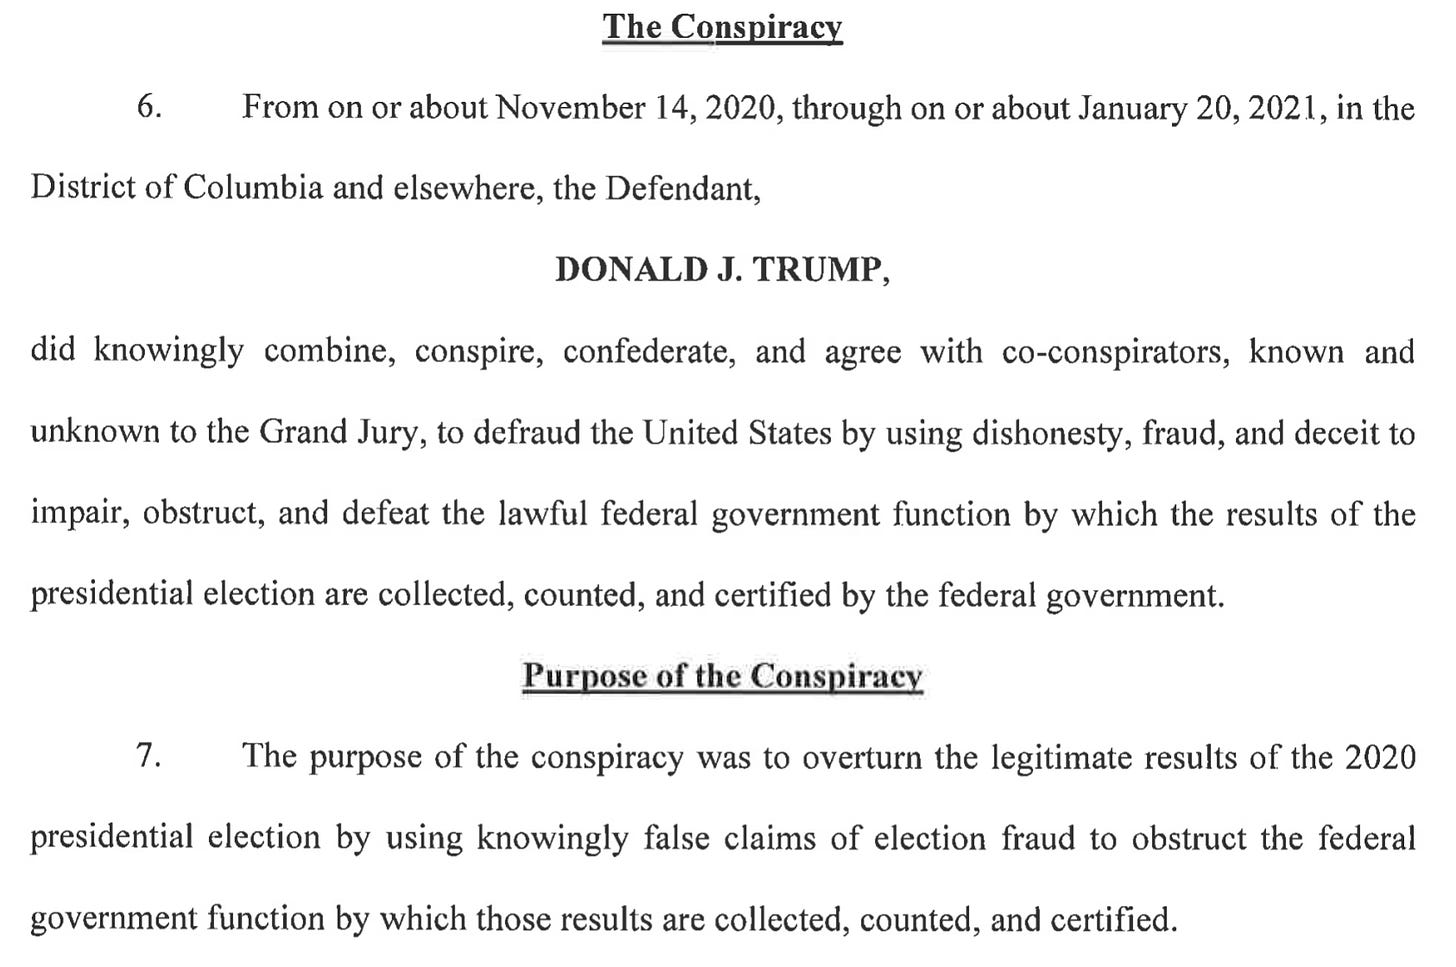  The Conspiracy 6. From on or about November 14, 2020, through on or about January 20, 2021, in the District of Columbia and elsewhere, the Defendant, DONALD J. TRUMP, did knowingly combine, conspire, confederate, and agree with co-conspirators, known and unknown to the Grand Jury, to defraud the United States by using dishonesty, fraud, and deceit to impair, obstruct, and defeat the lawful federal government function by which the results of the presidential election are collected, counted, and certified by the federal government. Purpose of the Conspiracy 7. The purpose of the conspiracy was to overturn the legitimate results of the 2020 presidential election by using knowingly false claims of election fraud to obstruct the federal government function by which those results are collected, counted, and certified.